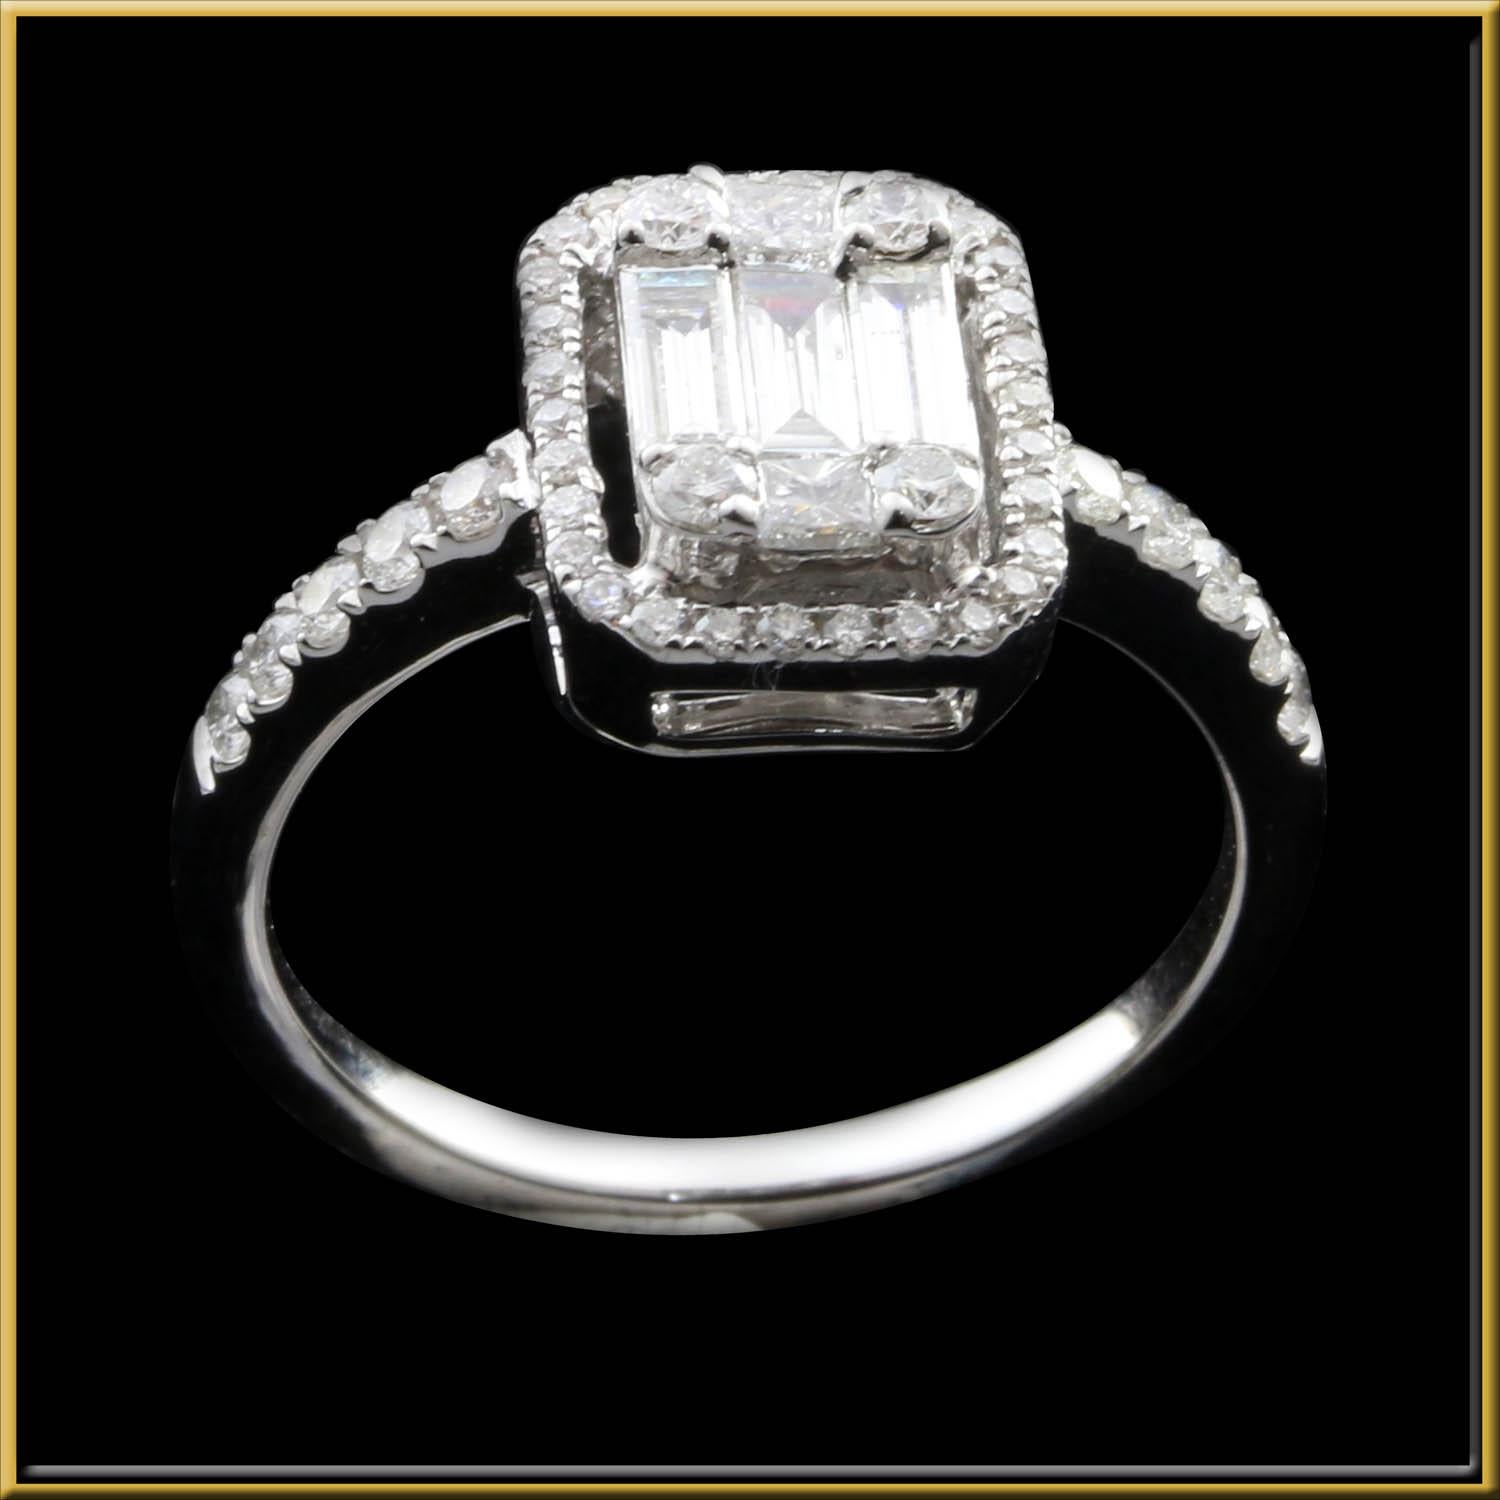 For Sale:  2ct Emerald Cut Diamond Illusion Engagement Ring Set in 18kt Gold 2